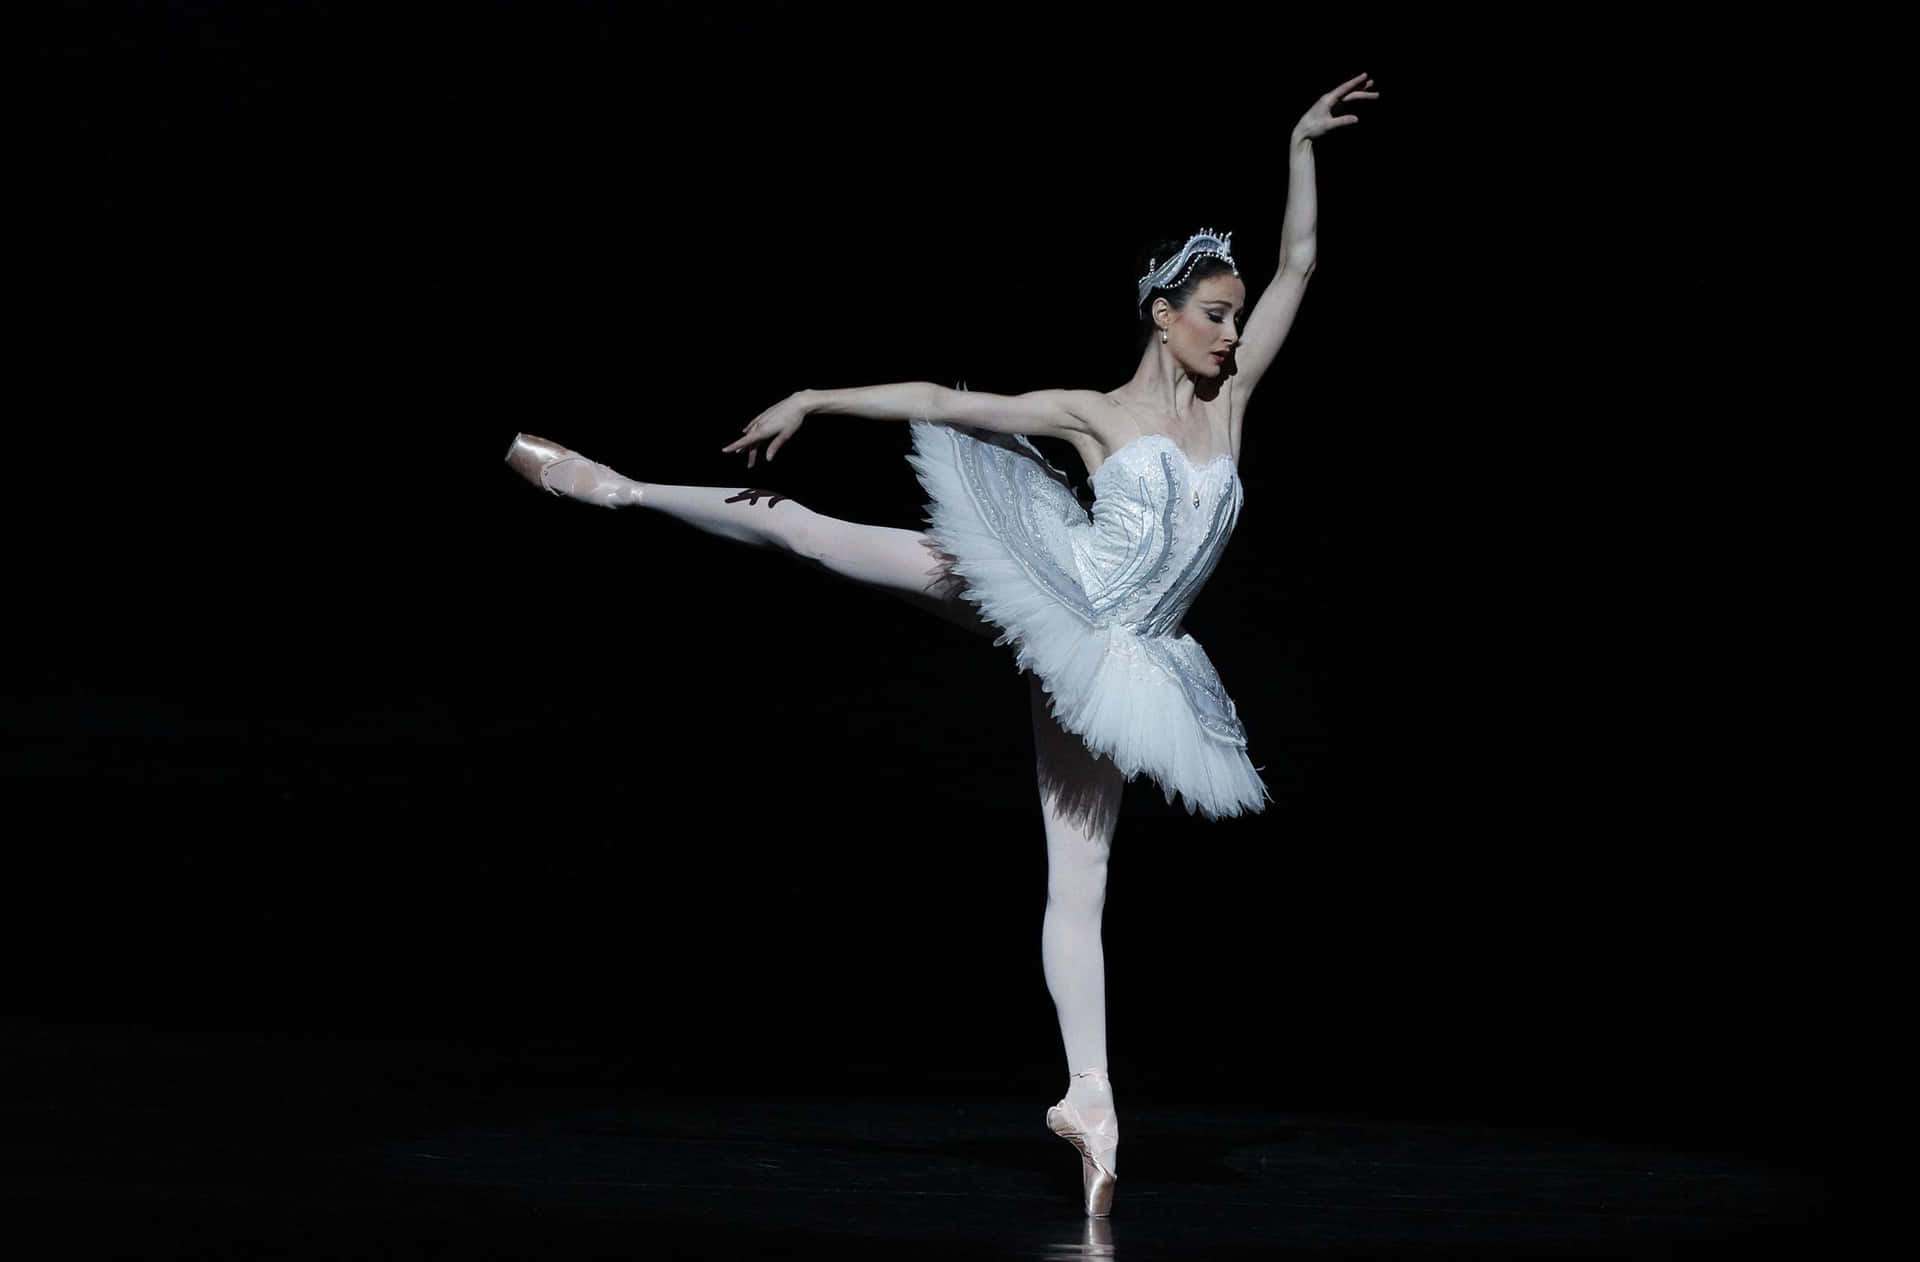 A White Ballerina Is Performing On A Black Stage